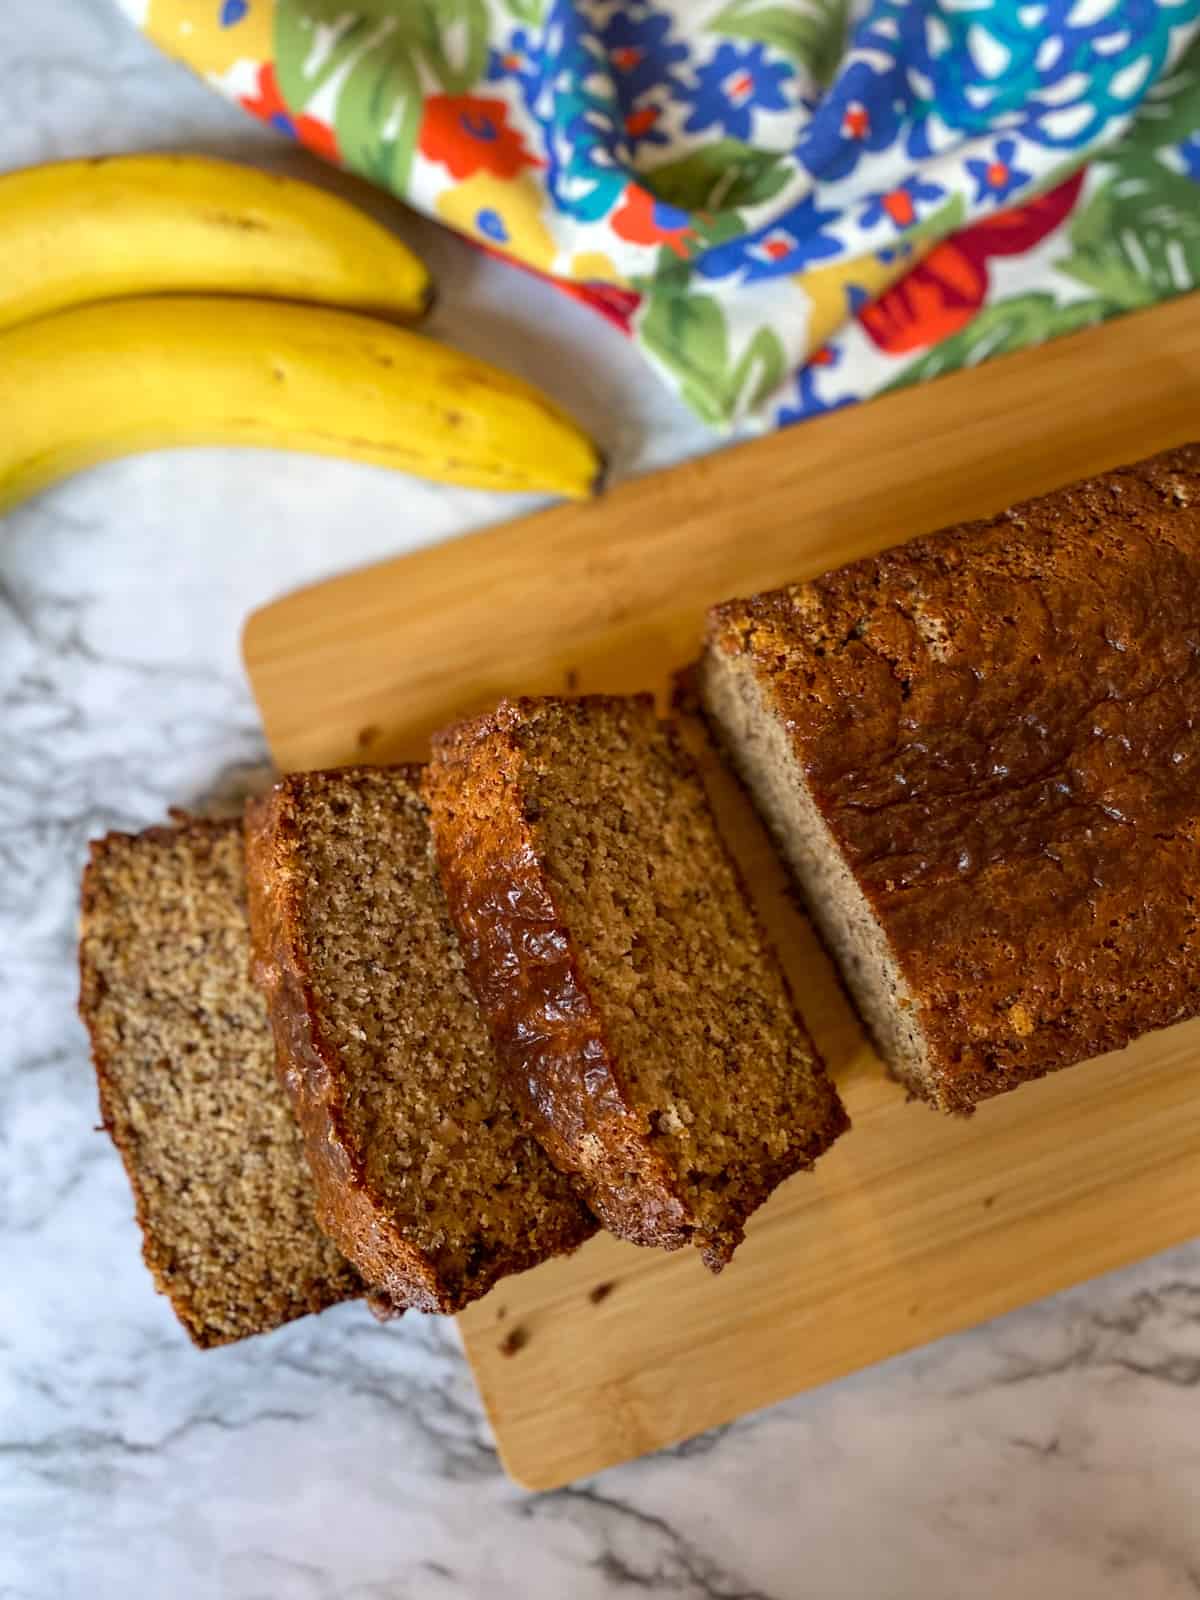 Slices of banana bread on a cutting board.